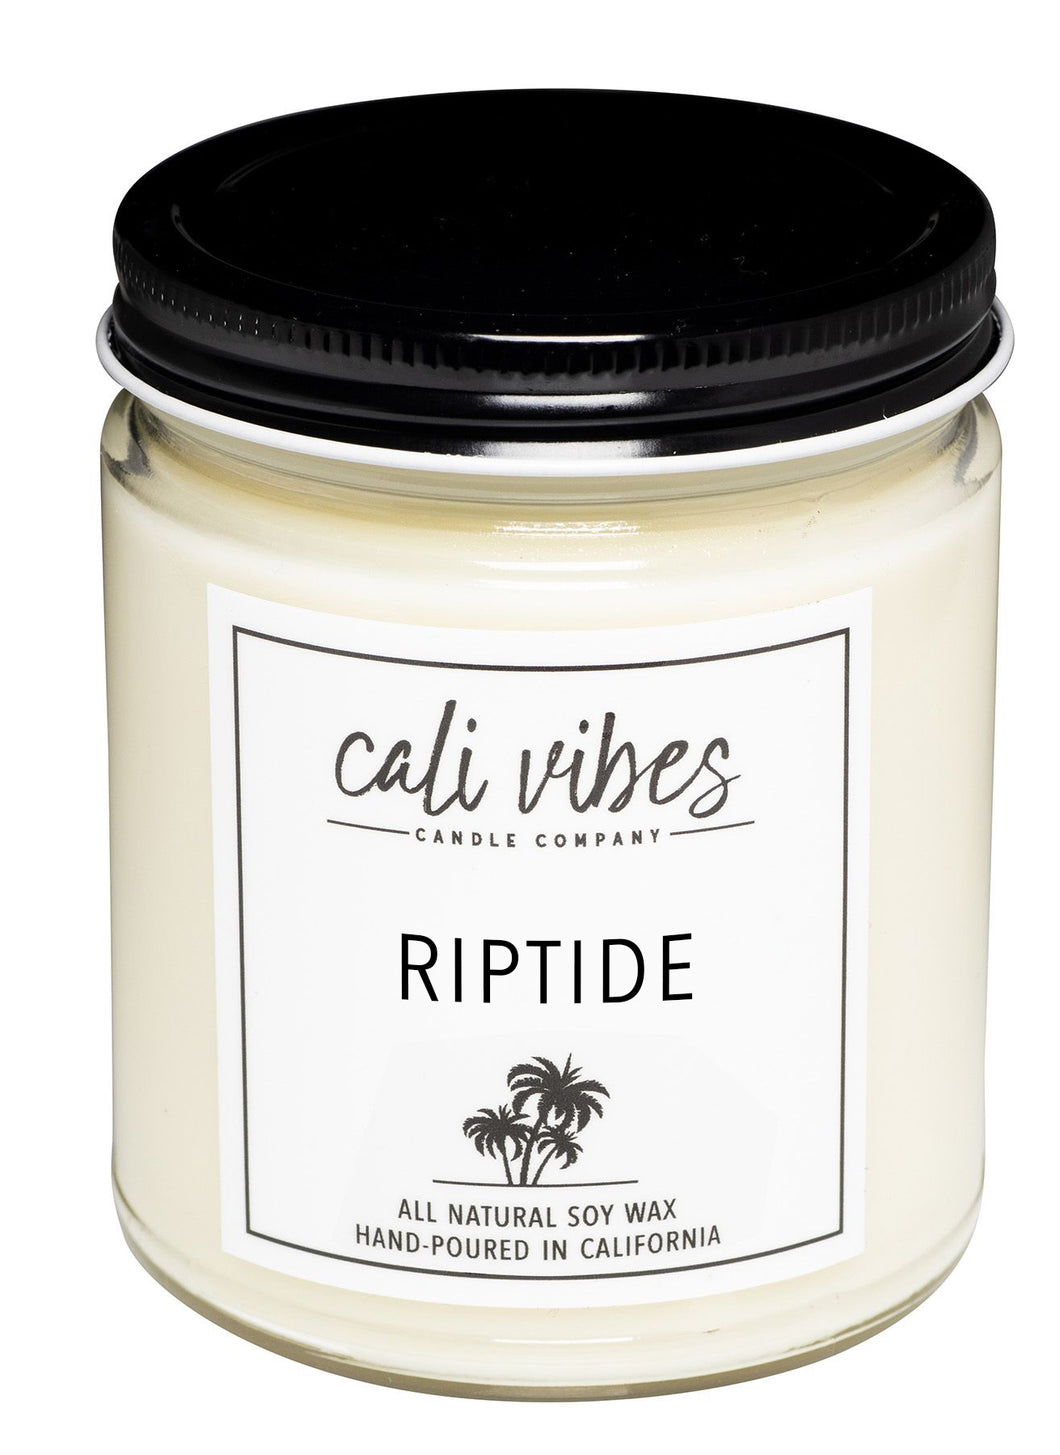 Riptide - Natural Soy Wax Candle